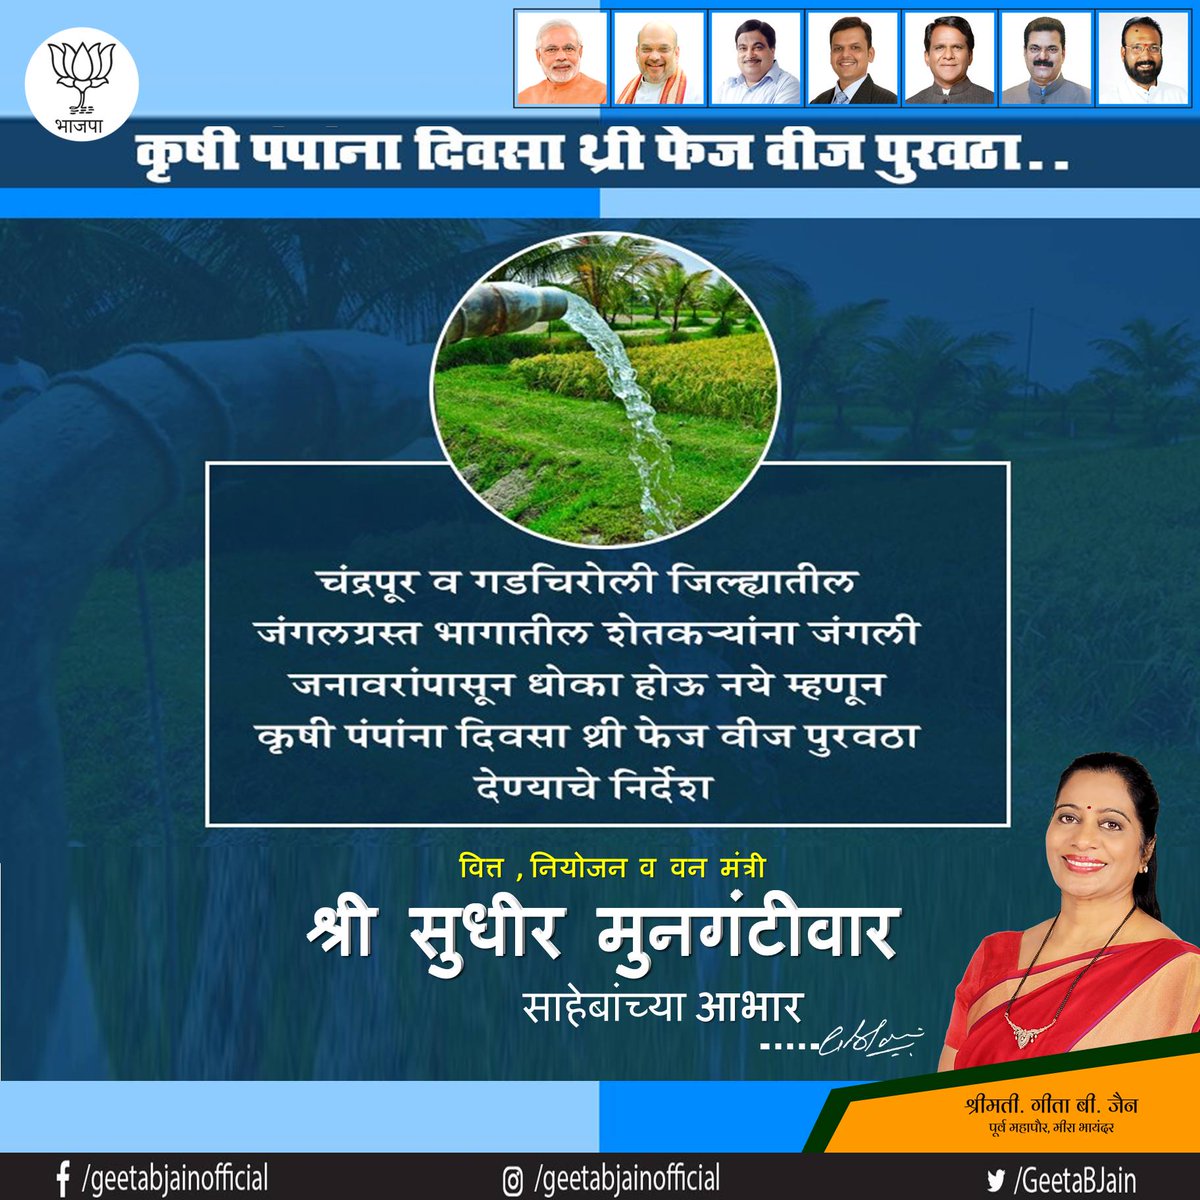 Instructions given to provide 3 Phase Power Supply for Agricultural Pumps for farmers under threat from Wild Animals in Forest Areas of Chandrapur and Gadchiroli ,we thank you for all your efforts for the famers of Mahaharashtra @SMungantiwar